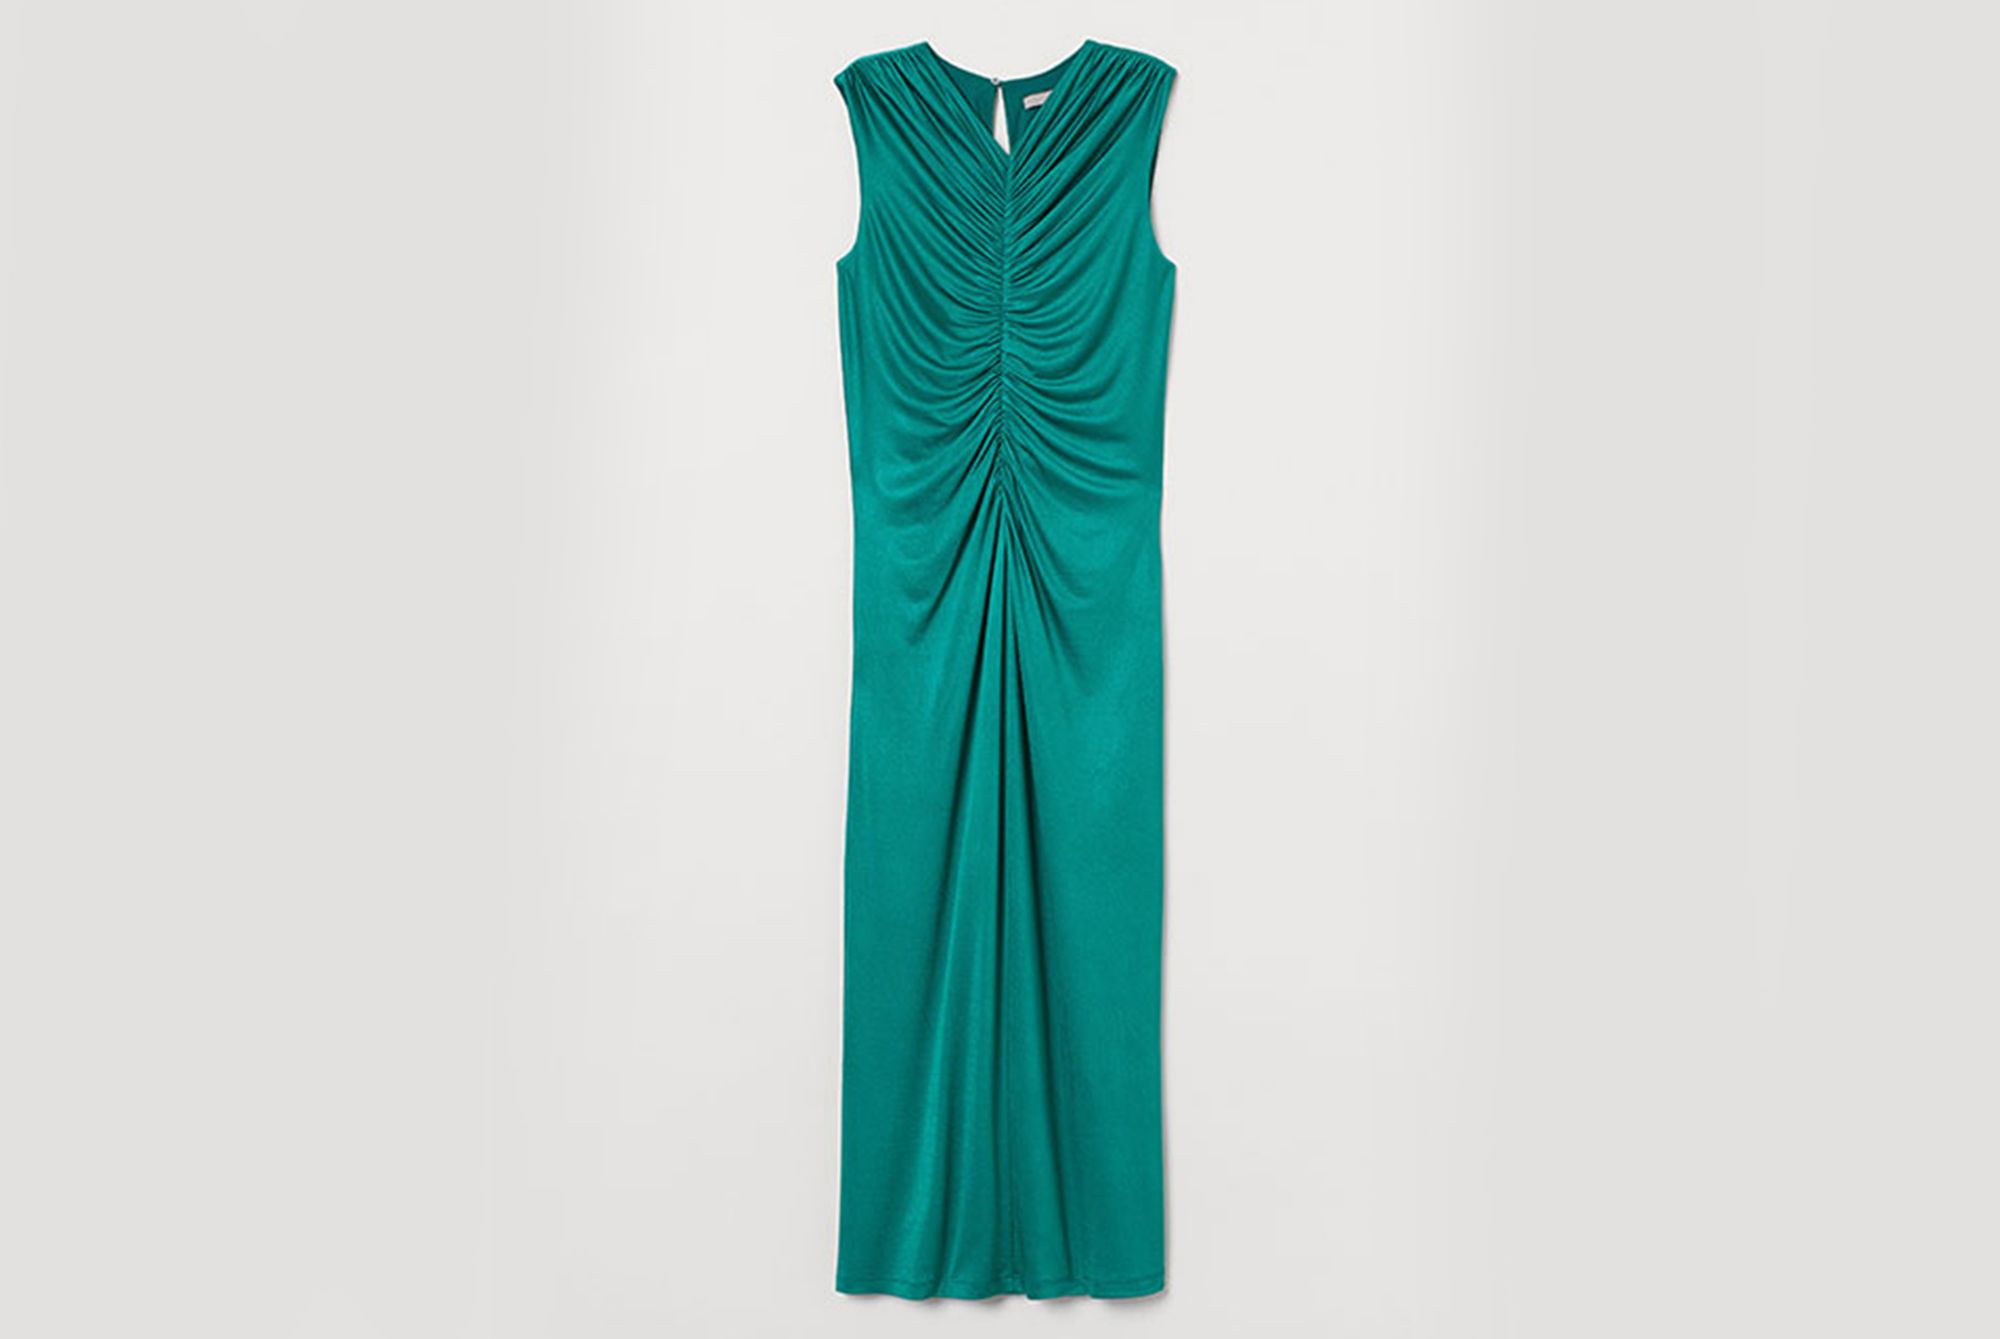 H&M brand emerald green dress made of 91% cellulose acetate Eastman Naia™ 